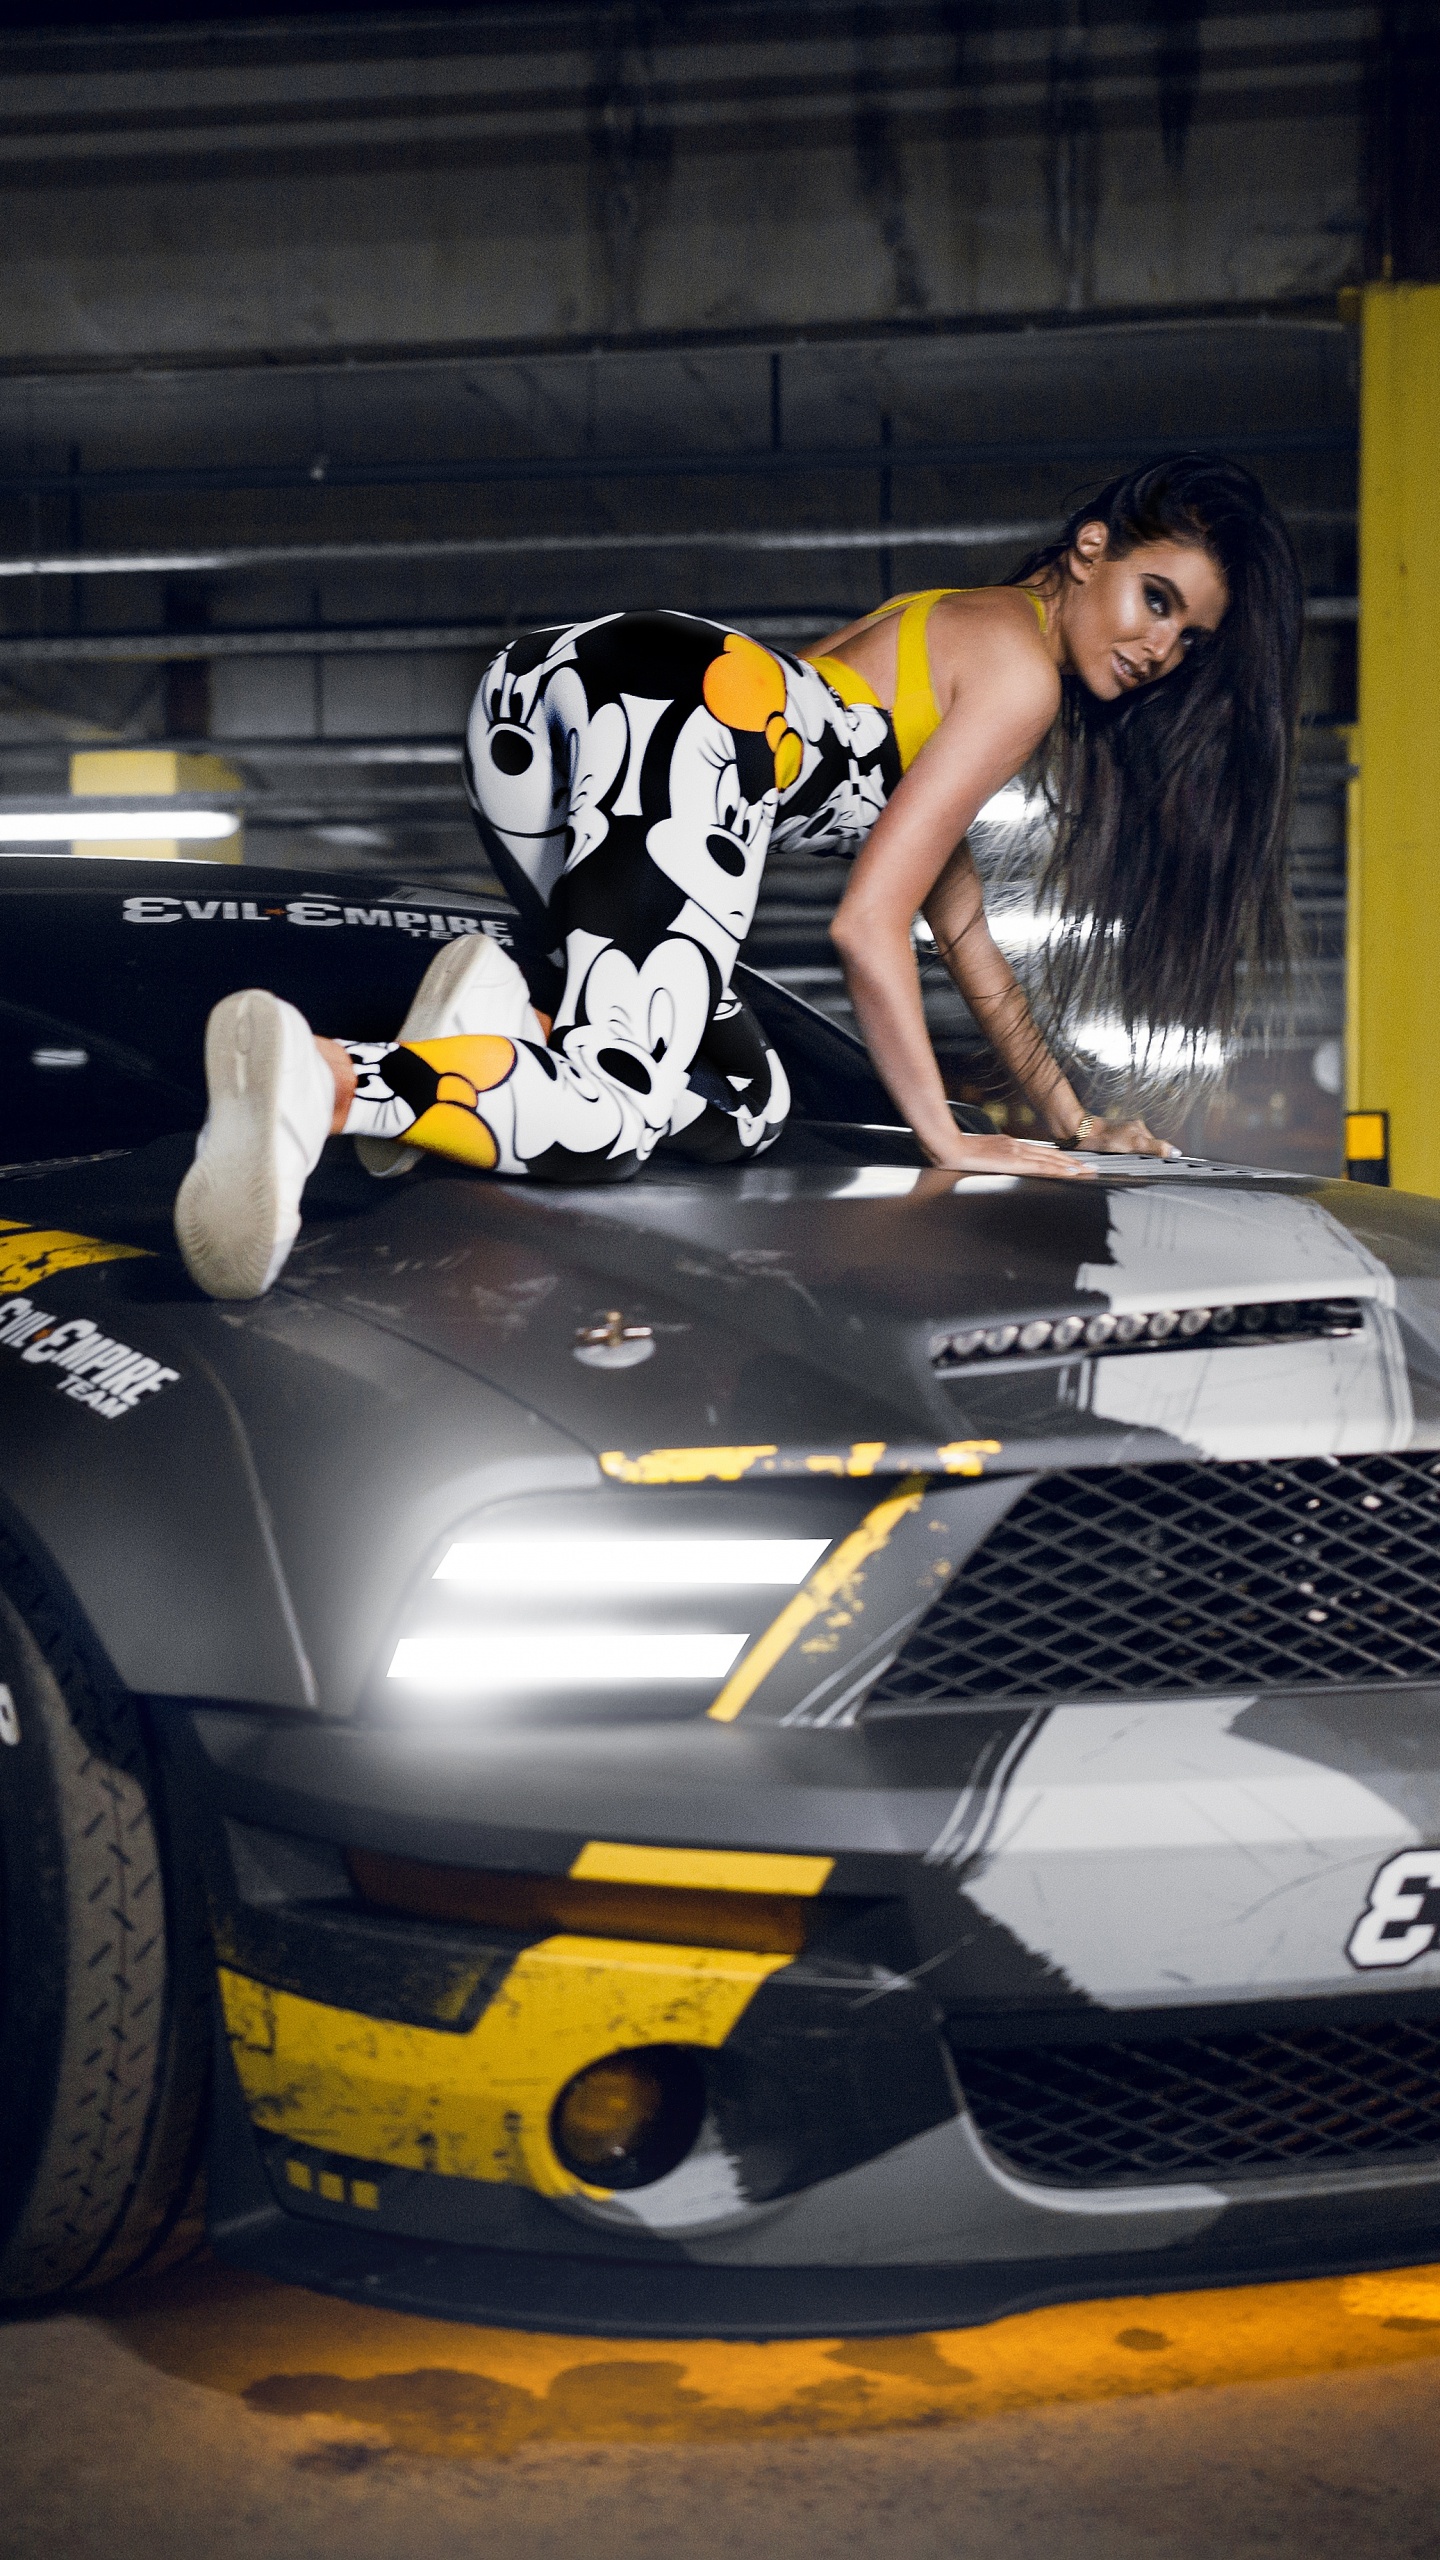 Woman in Black and White Floral Dress Riding on Black and Yellow Sports Car. Wallpaper in 1440x2560 Resolution